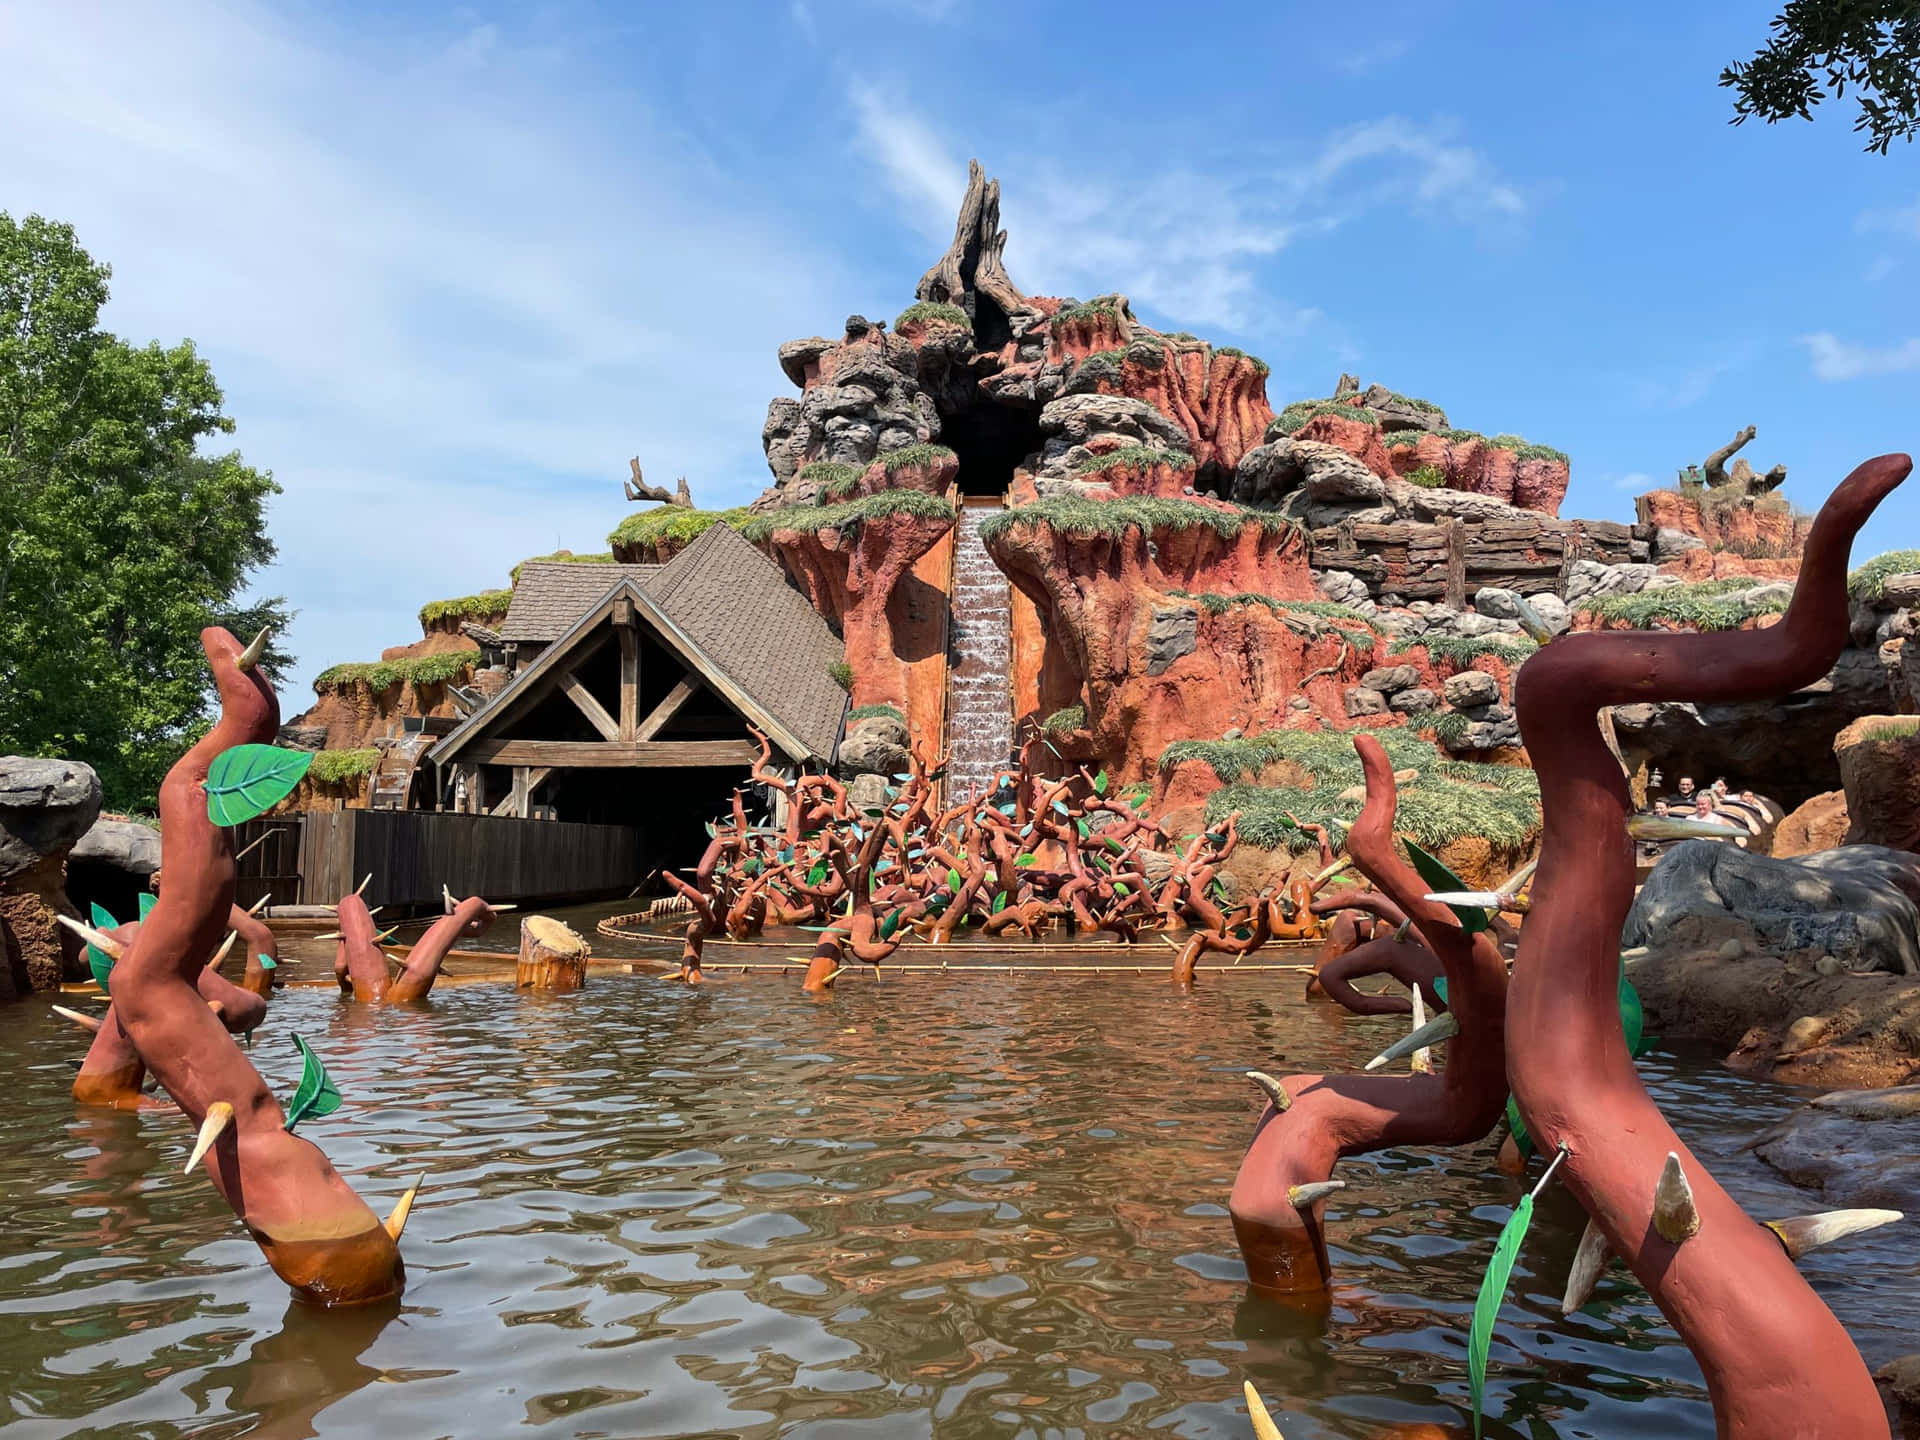 Guests splash through the Laughin' Place on Splash Mountain